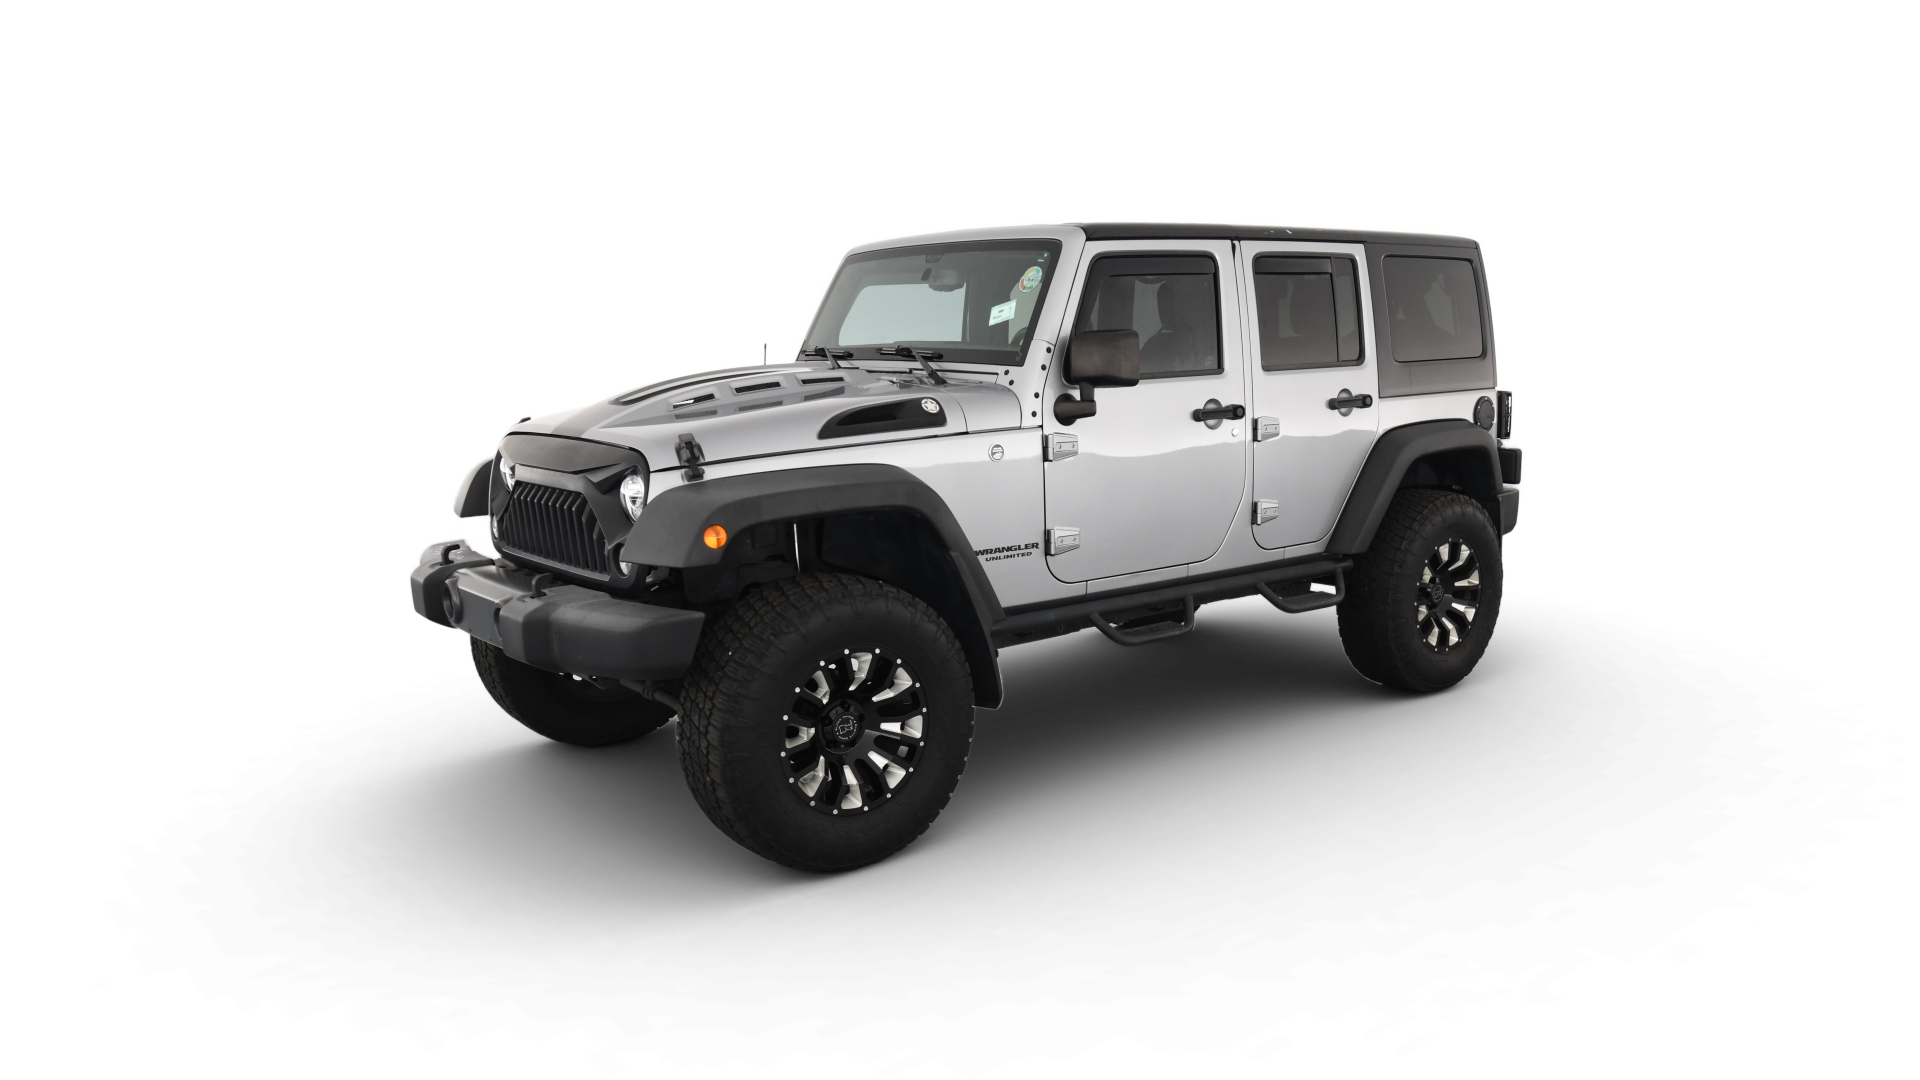 Used Jeep Wrangler Unlimited Big Bear For Sale Online | Carvana